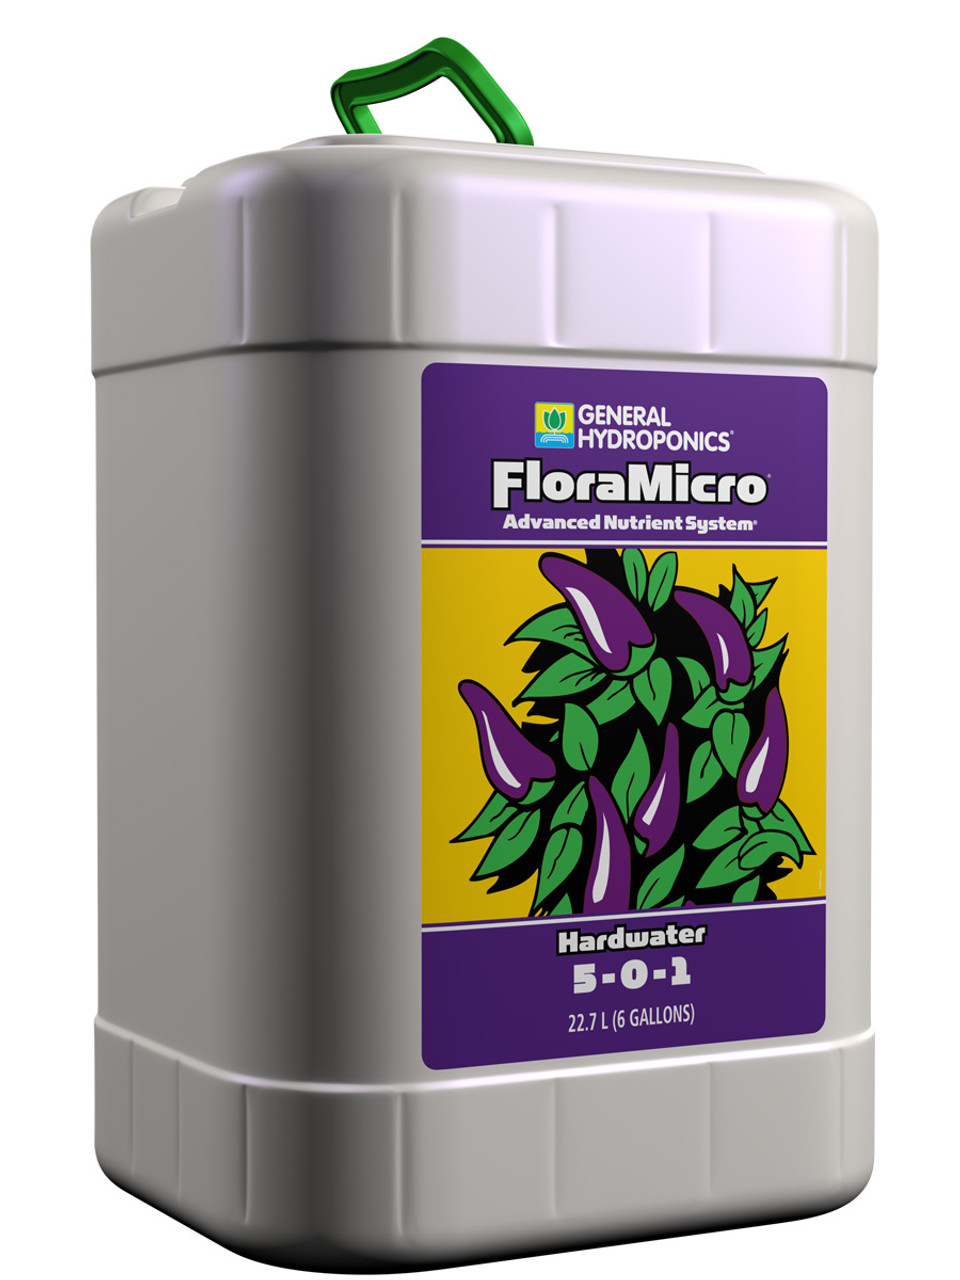 General Hydroponics FloraMicro Hardwater 6 Gallons